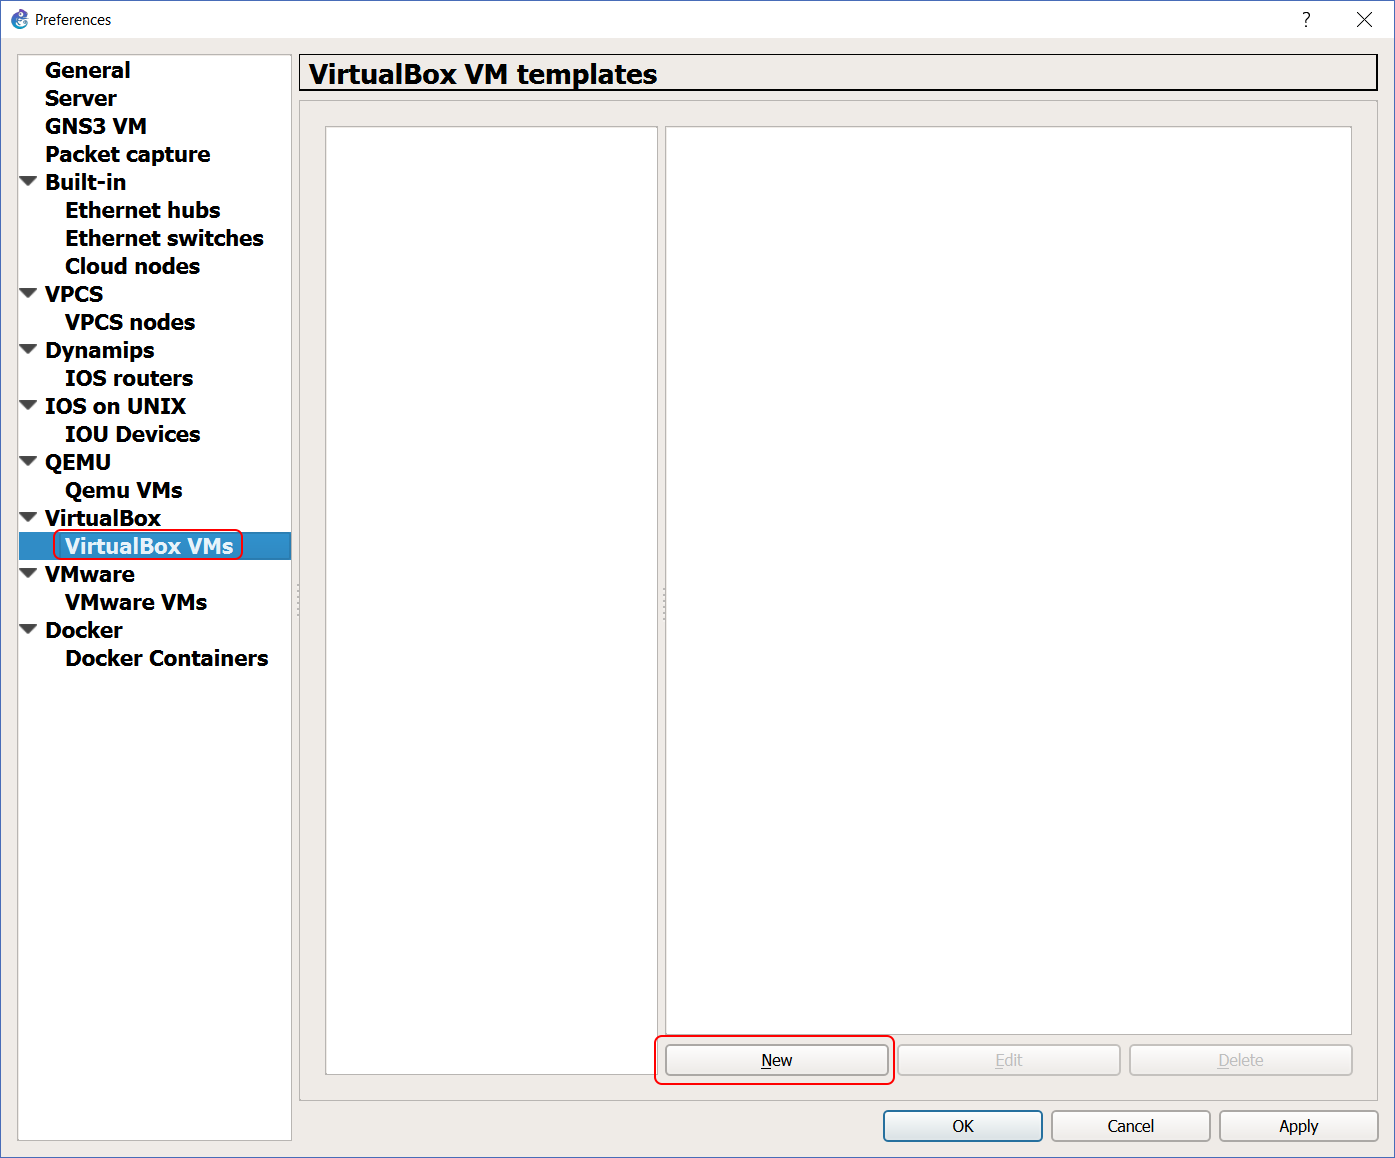 Add VMs in GNS3 by editing preferences